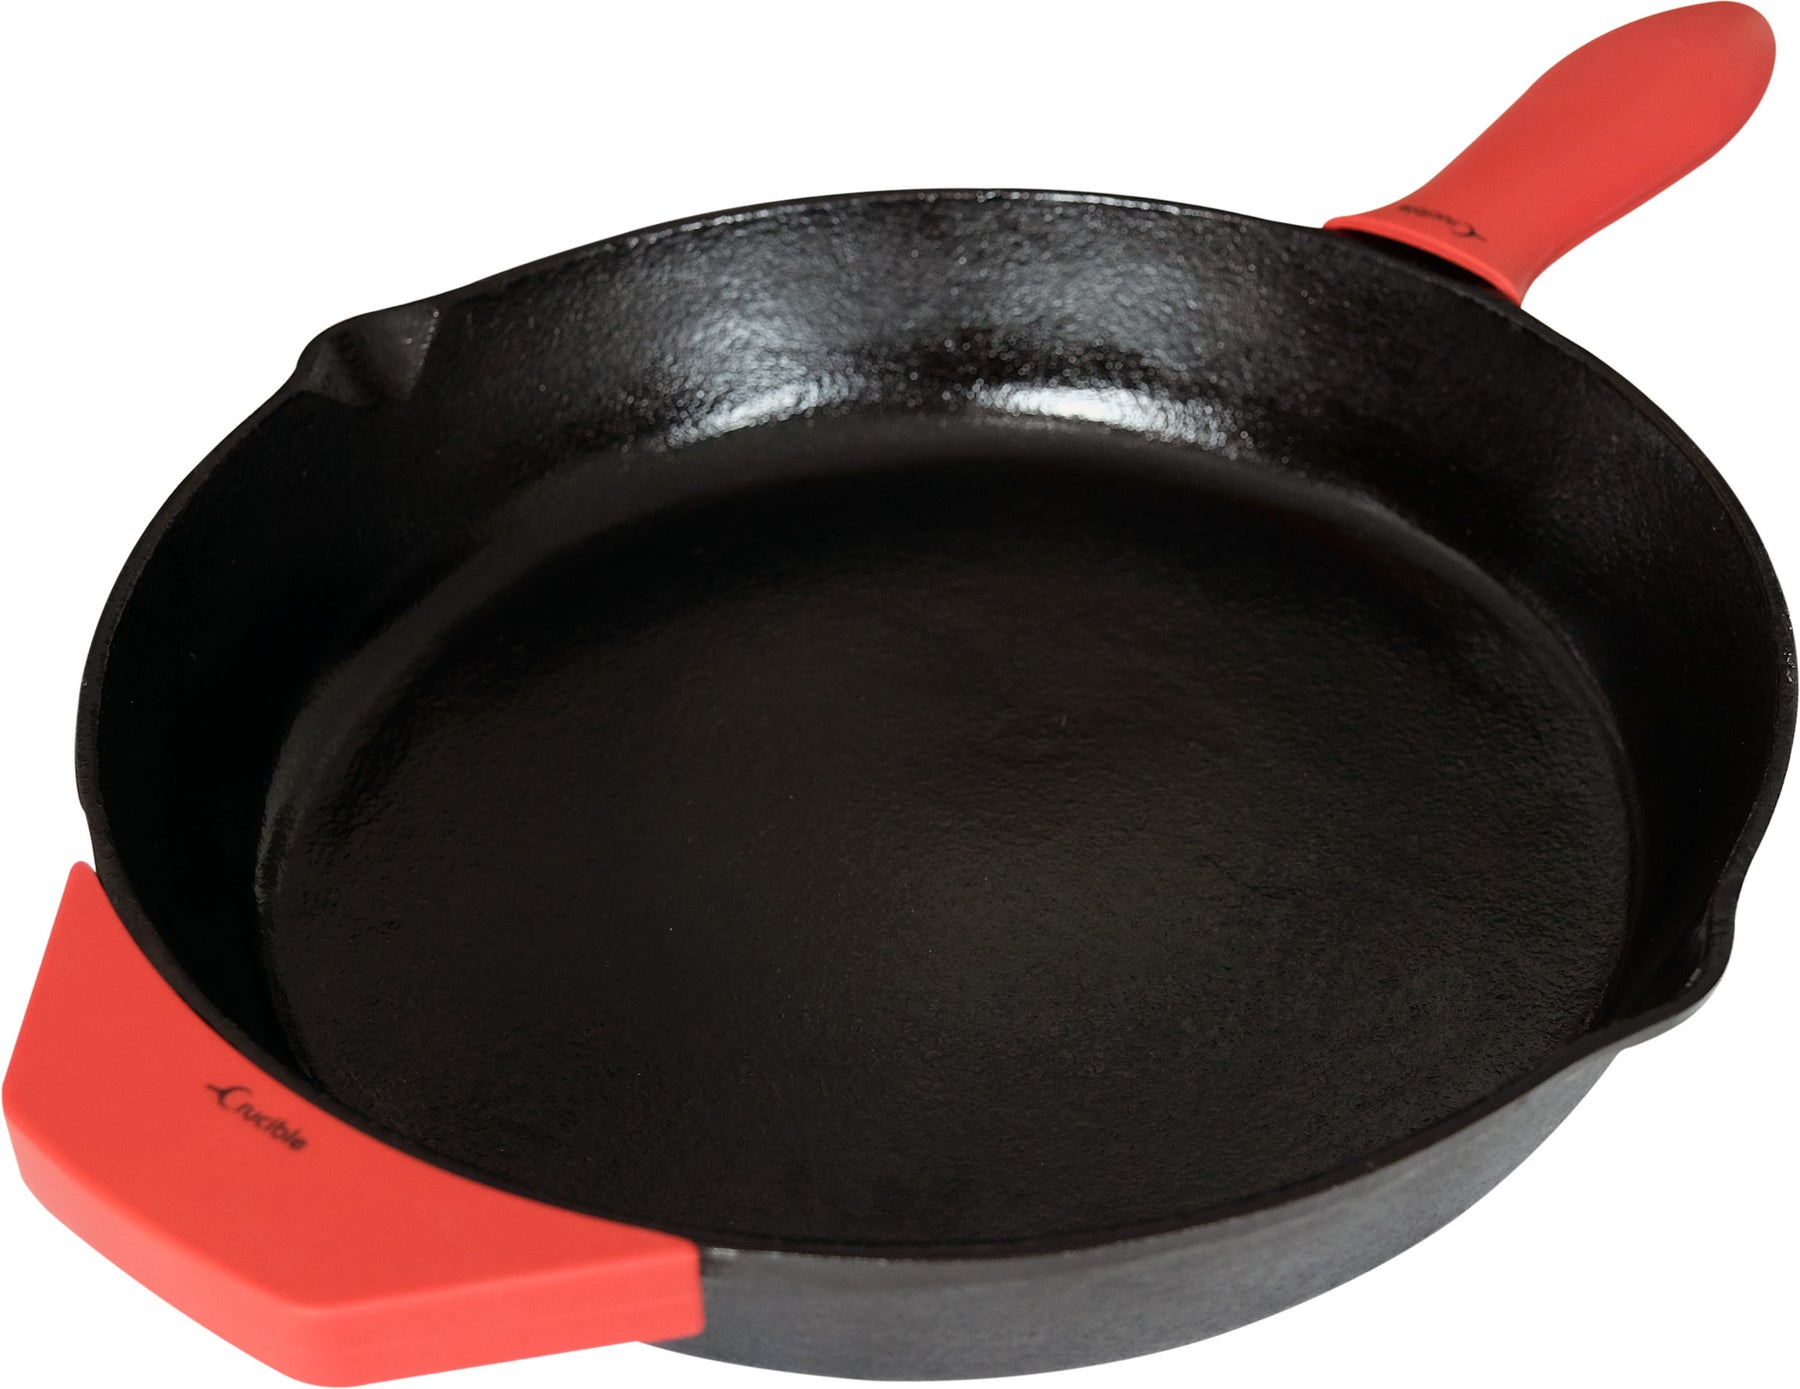 Cast Iron Skillet - 10-Inch Dual Handle Frying Pan + Silicone Handle  Holder Covers + Pan Scraper - Pre-Seasoned Oven, Grill, Fire, BBQ,  Stovetop, Induction Saf…